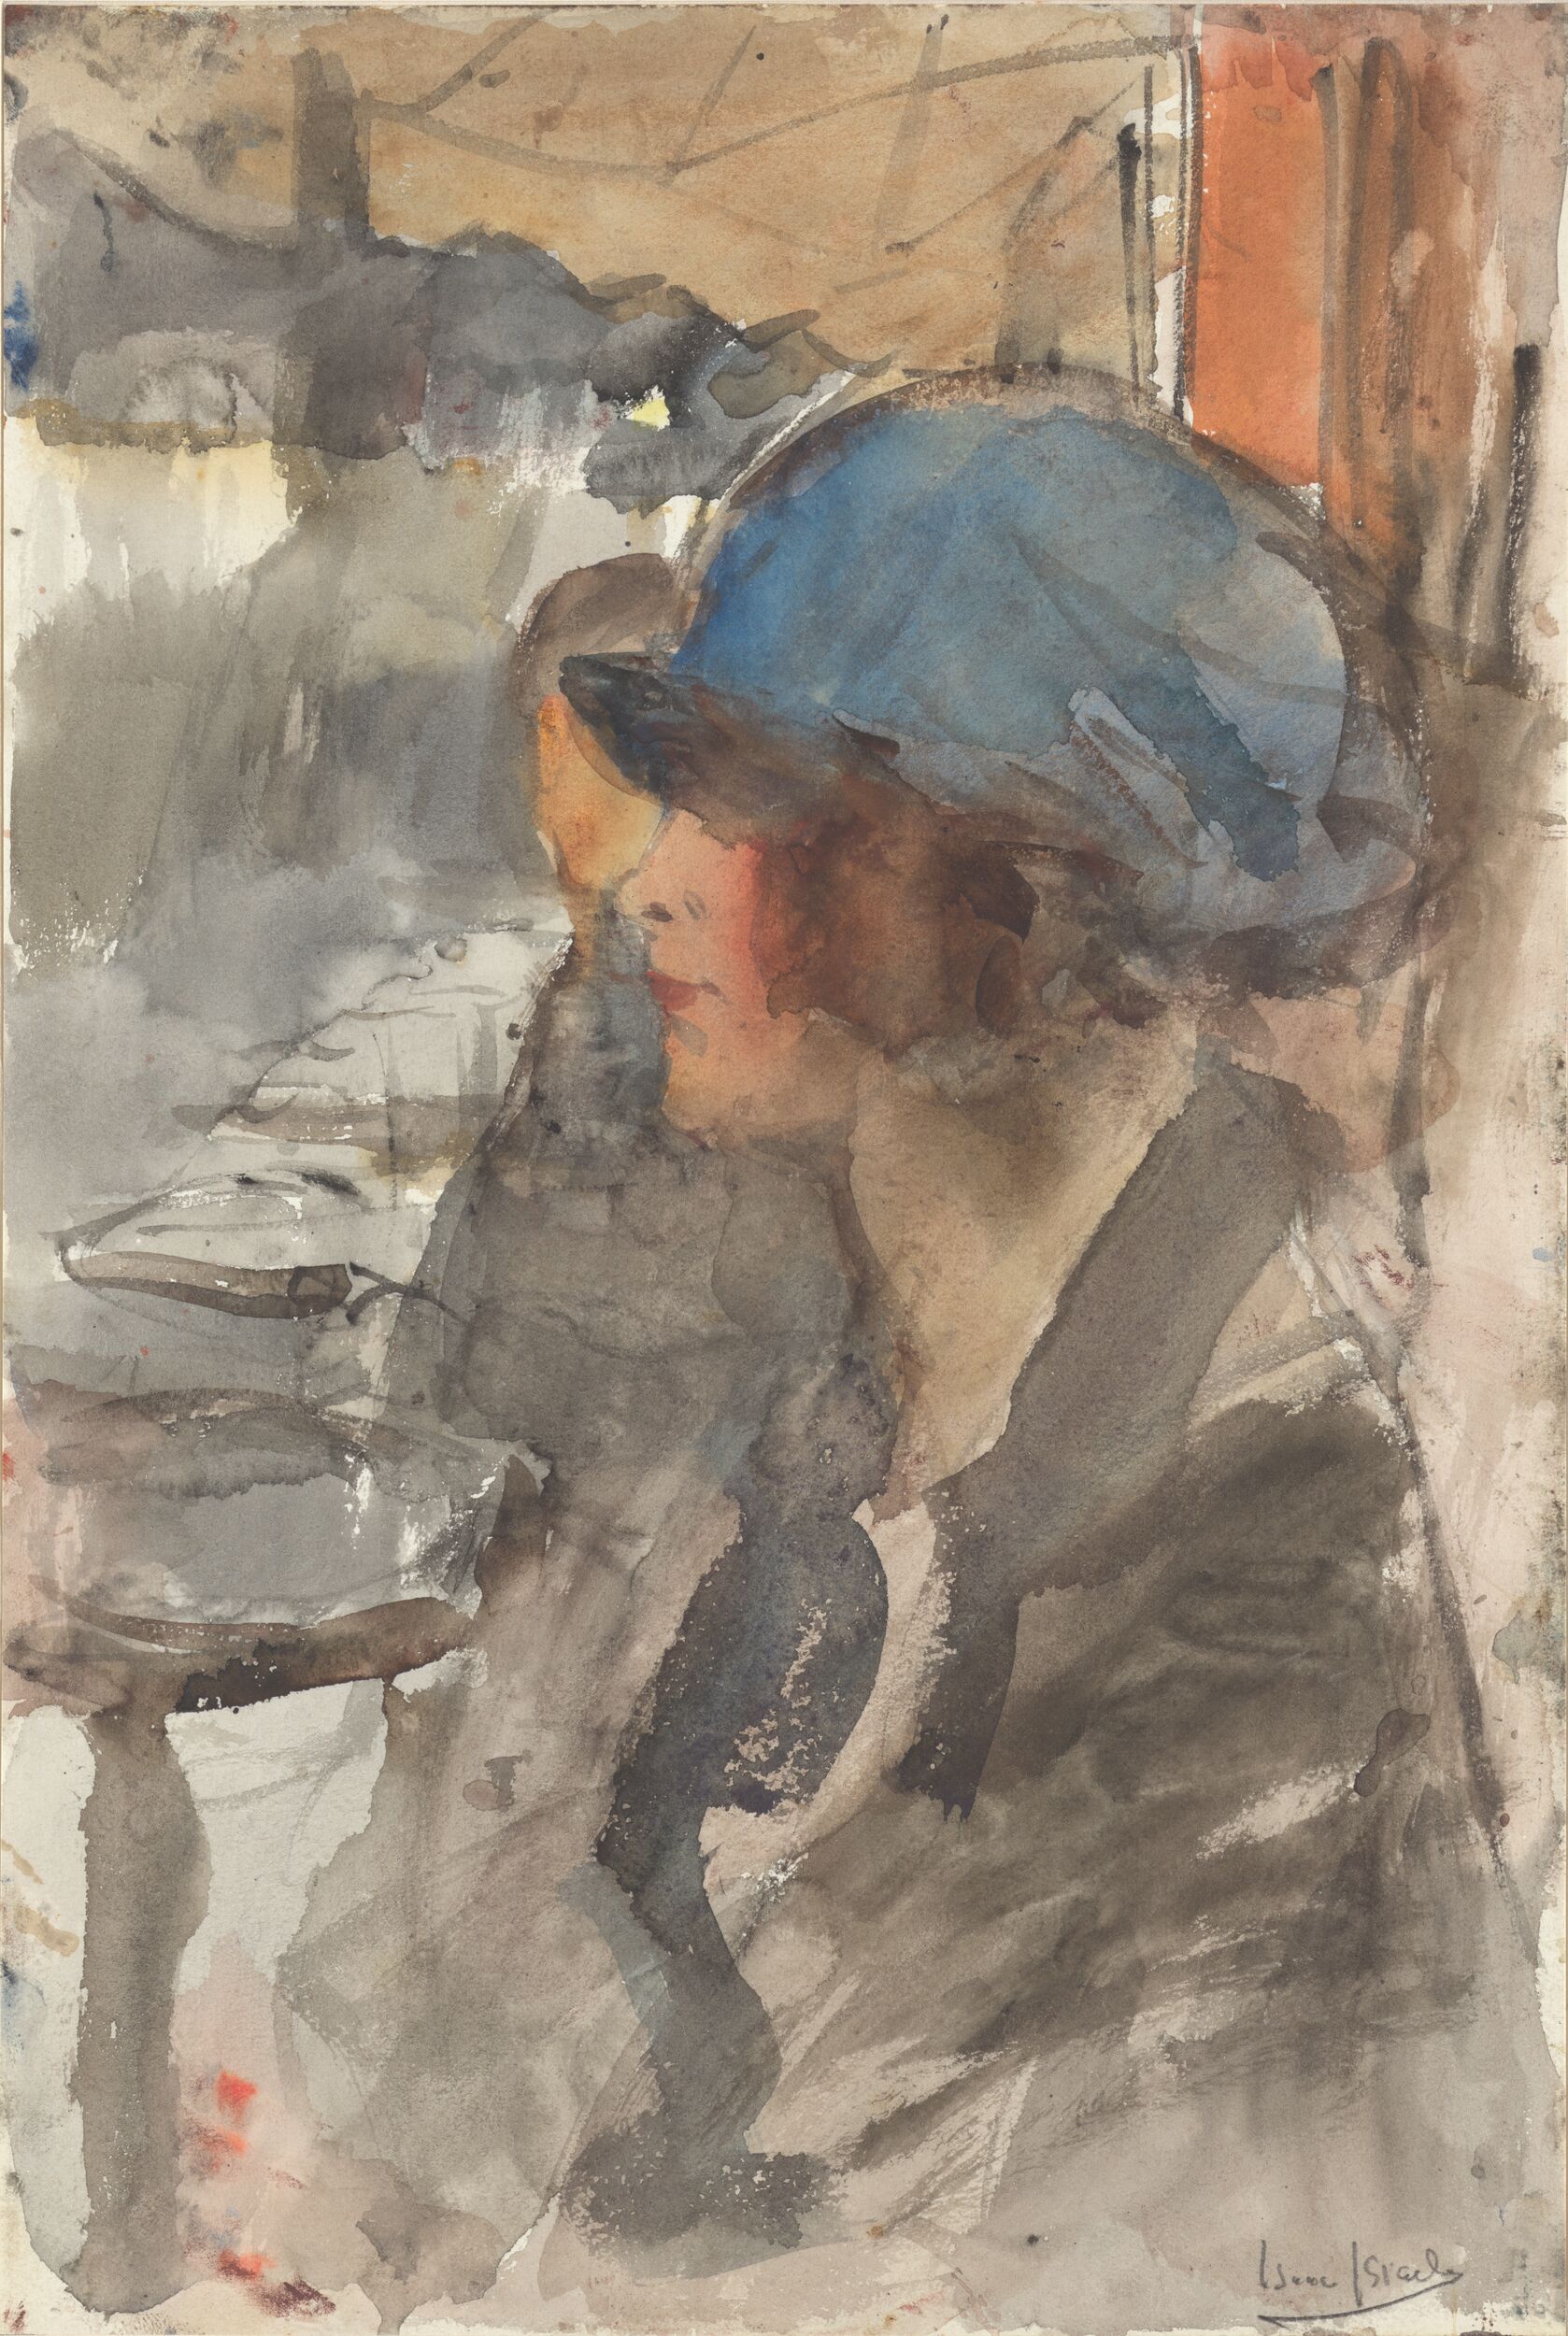 Woman with Blue Hat by Isaac Israels - 1920 - 39,1 x 26,3 cm Kröller-Müller Museum